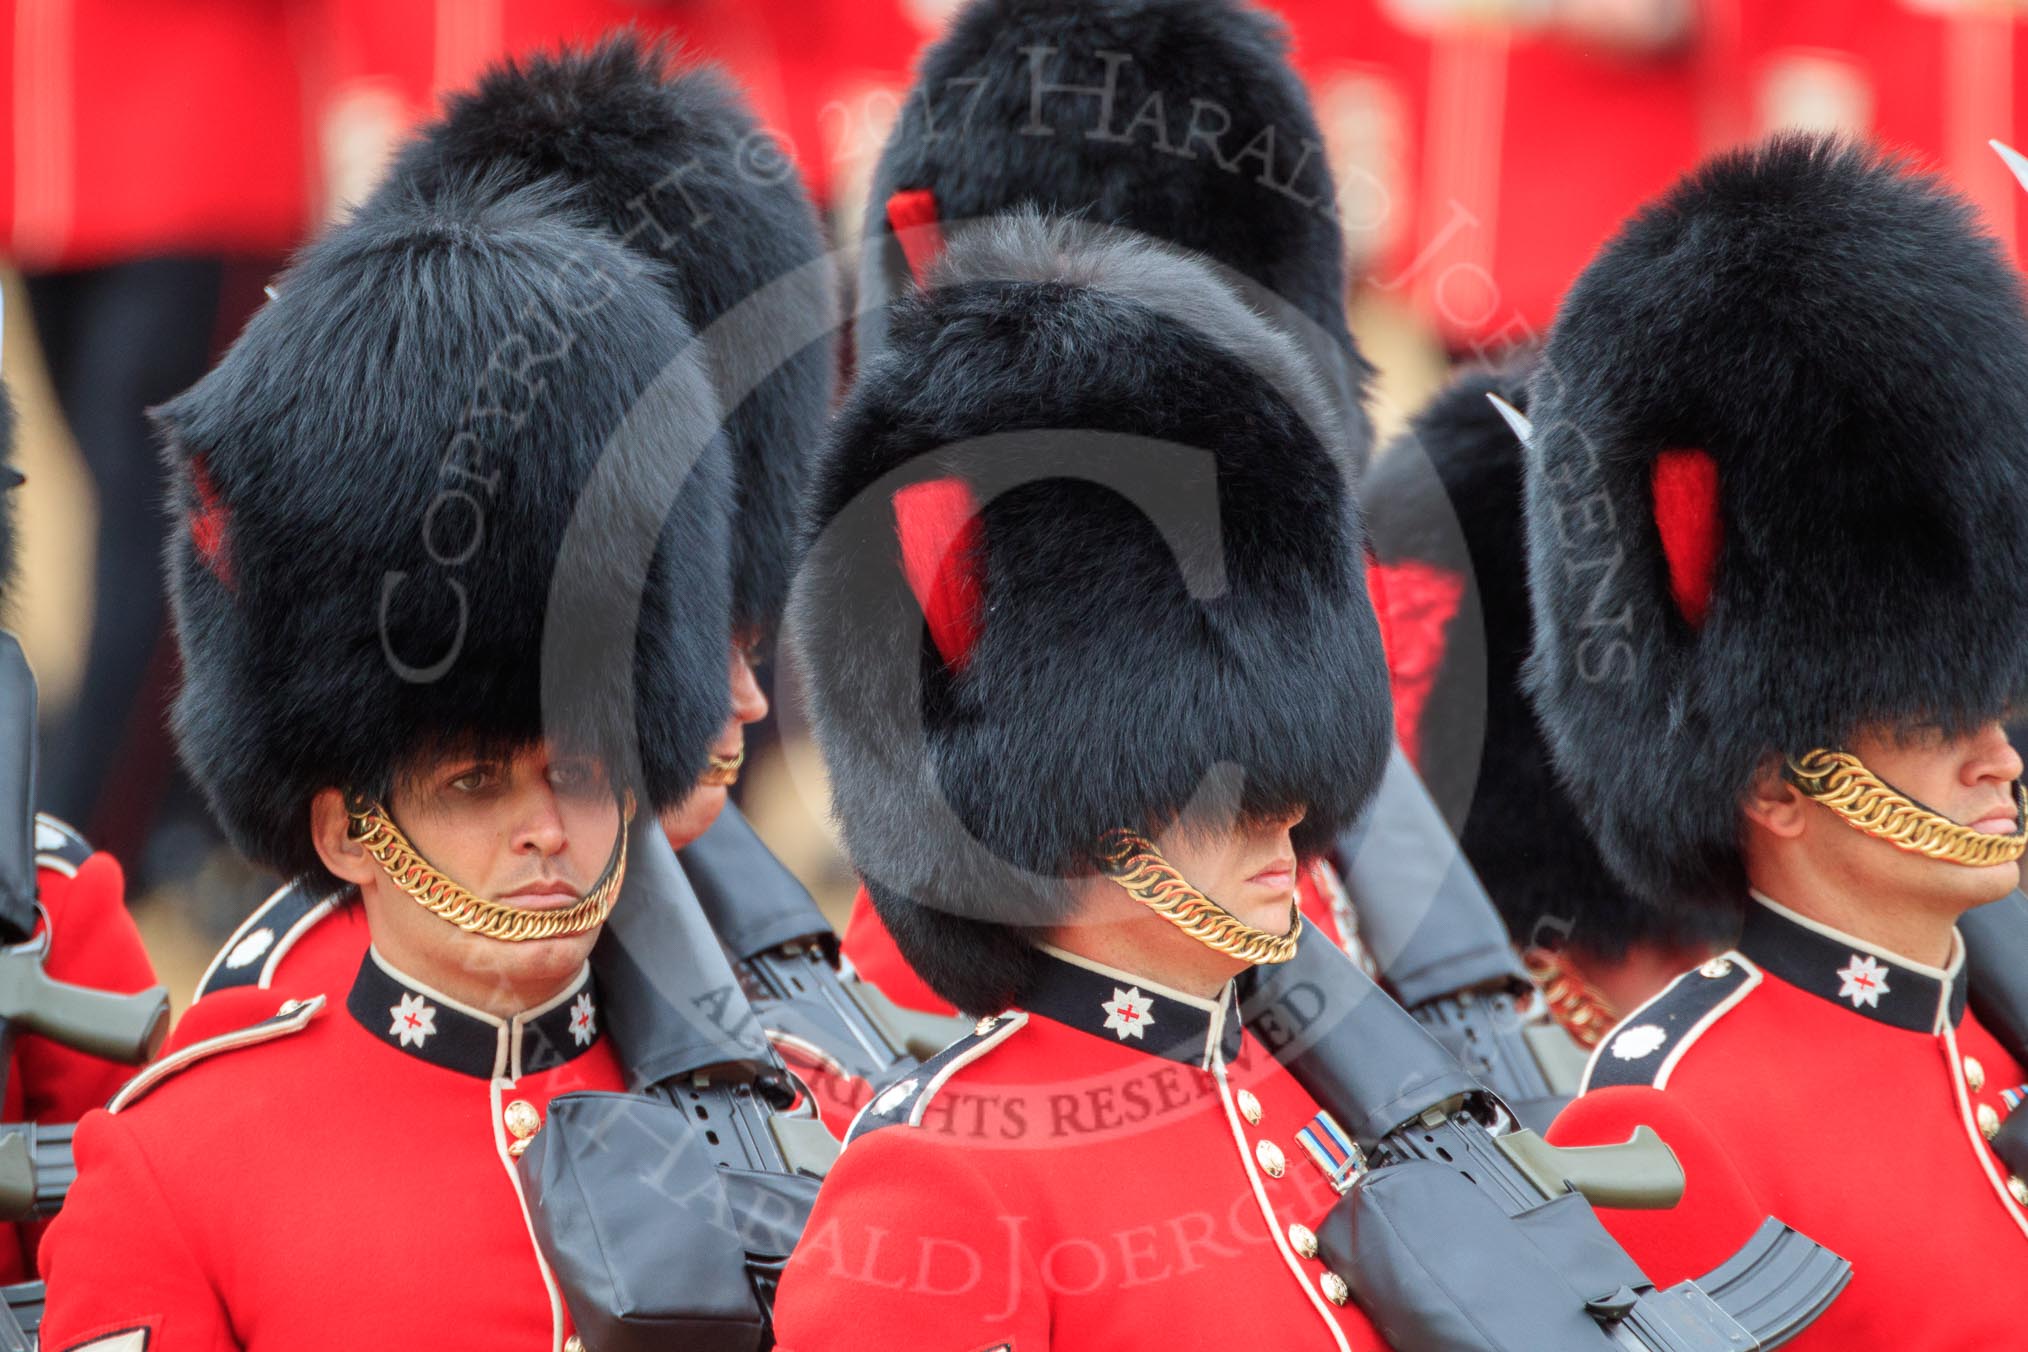 during The Colonel's Review {iptcyear4} (final rehearsal for Trooping the Colour, The Queen's Birthday Parade)  at Horse Guards Parade, Westminster, London, 2 June 2018, 11:36.